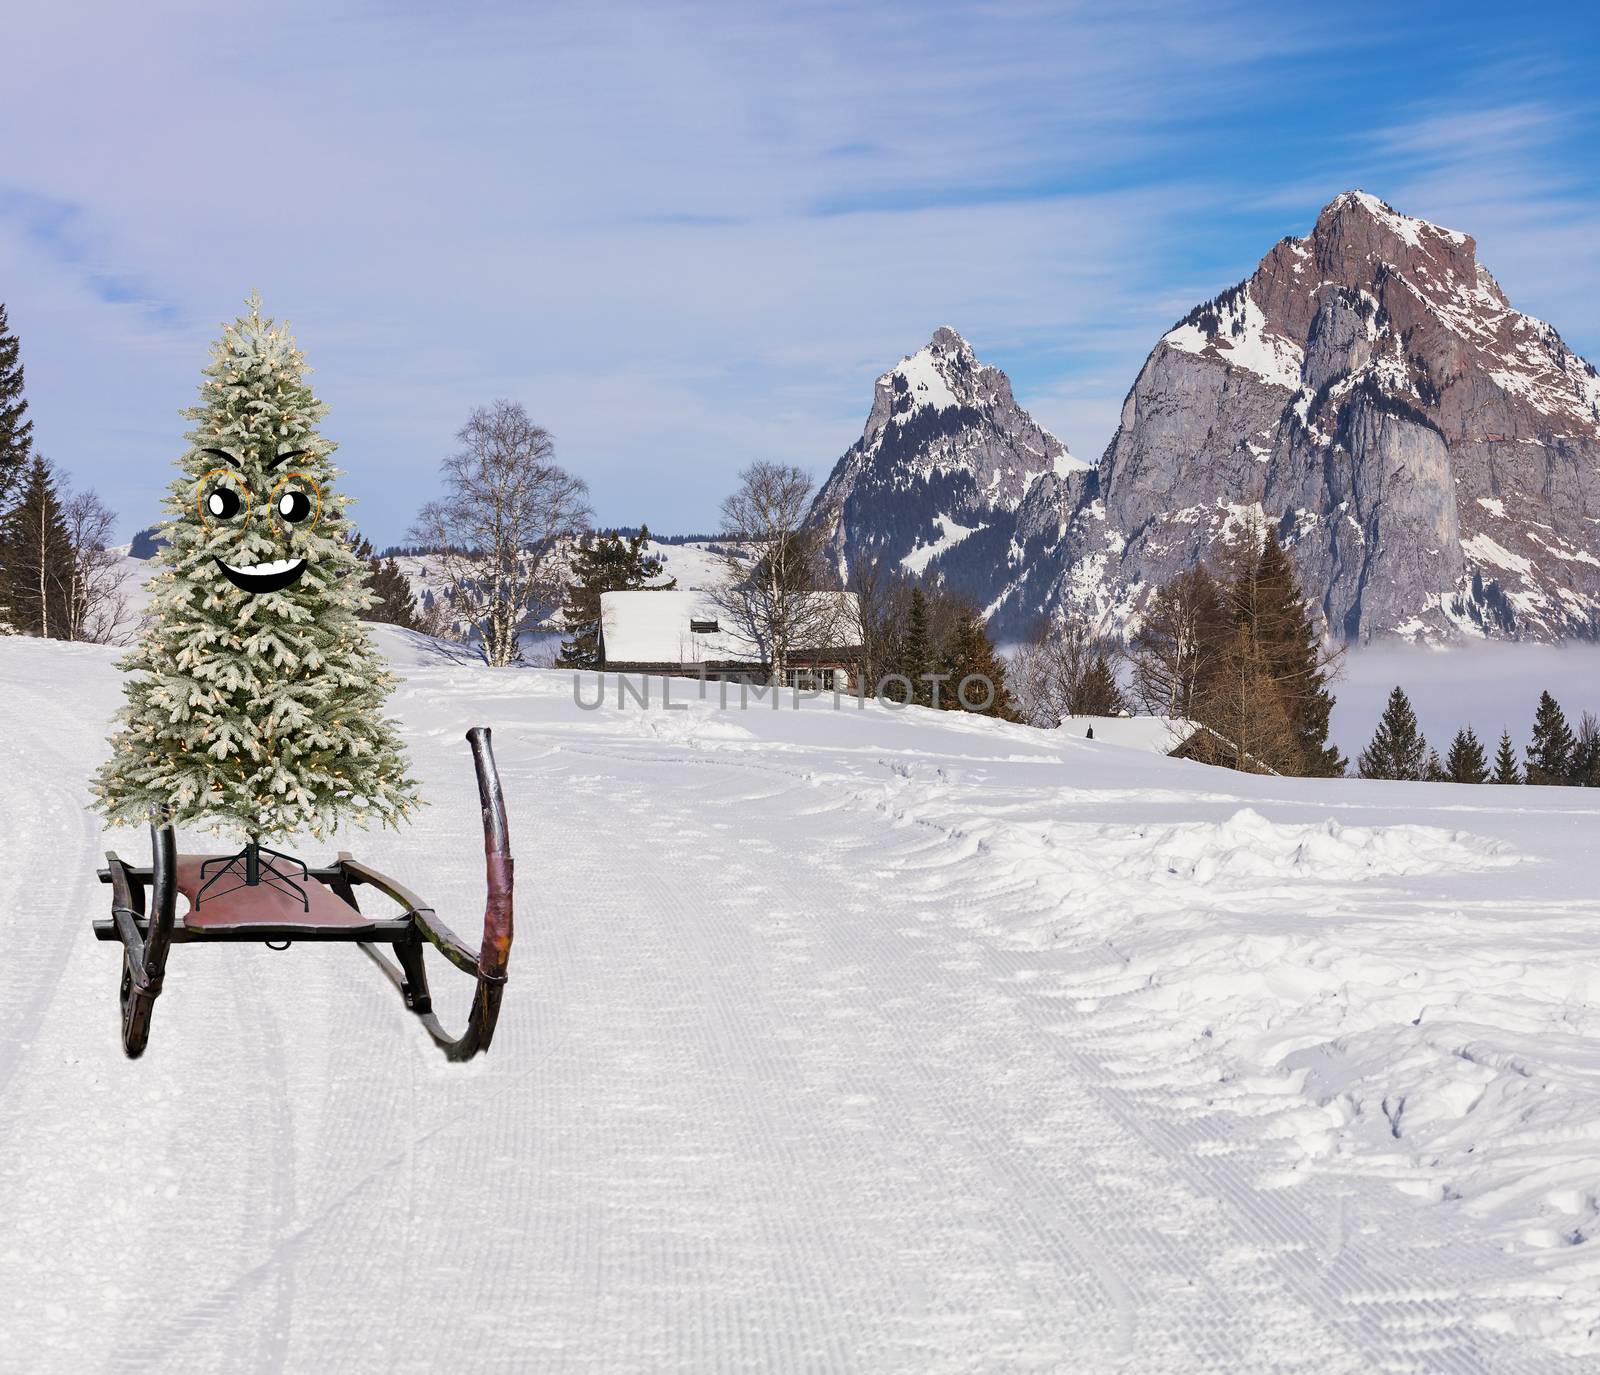 Merry christmas a happy smiling christmas pine tree sliding down hill on a sled in a winter mountain landscape